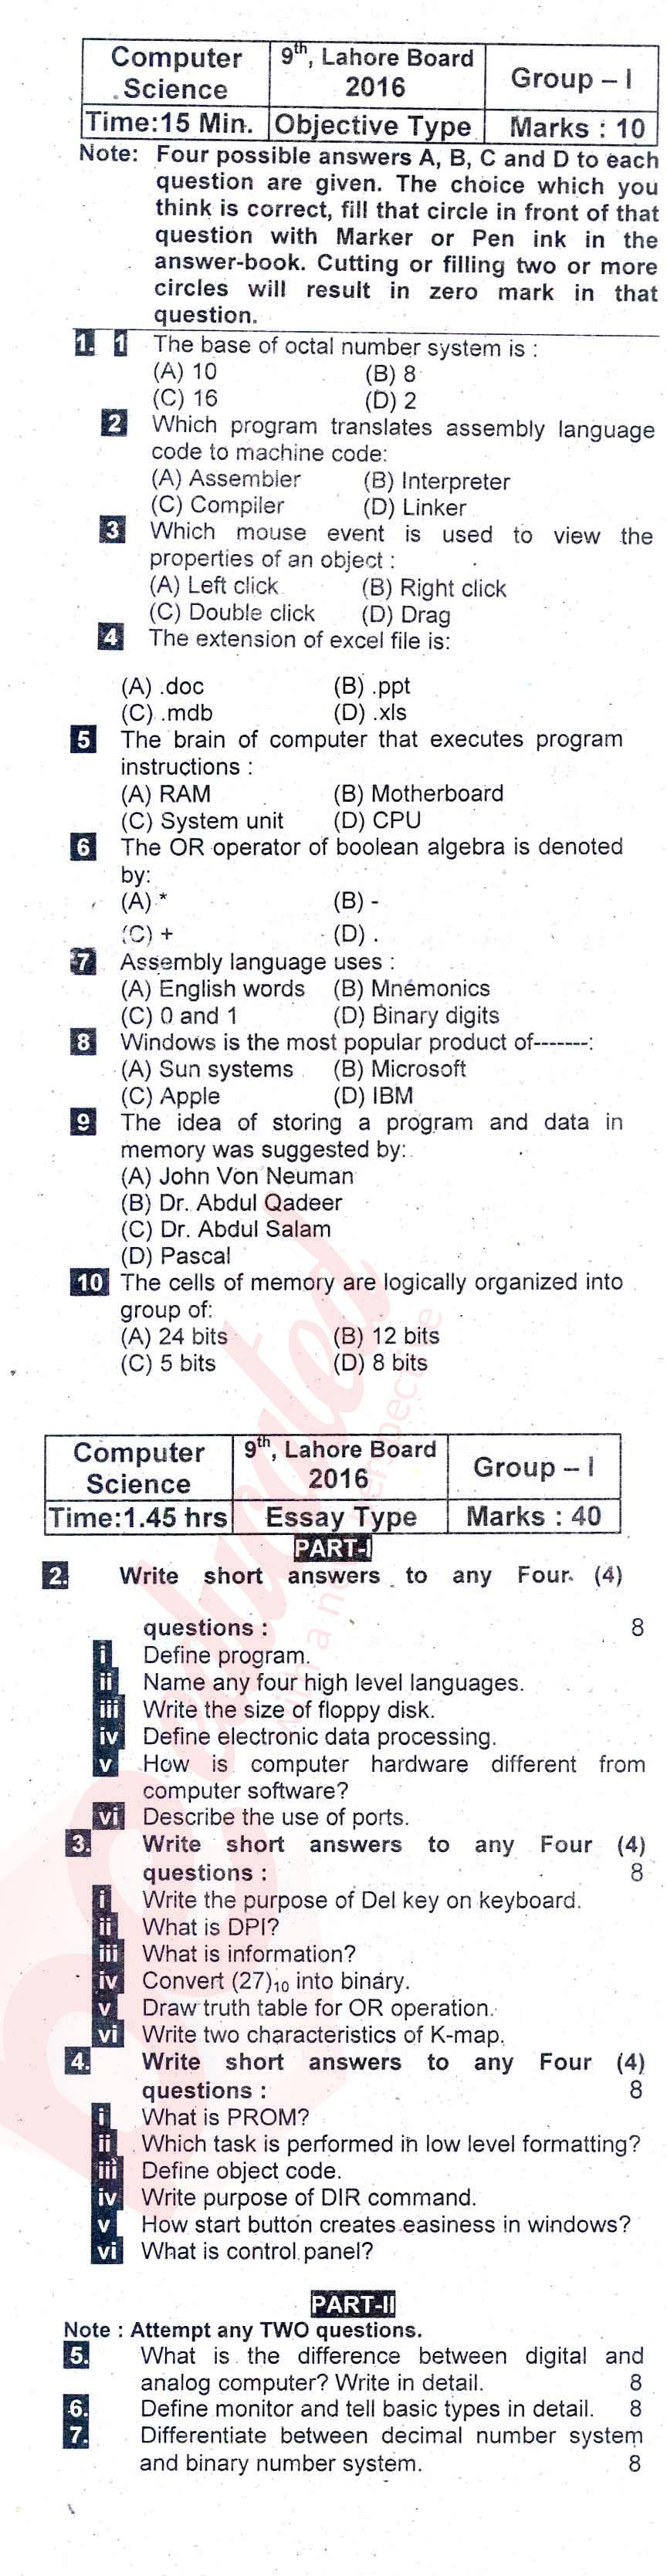 Computer Science 9th English Medium Past Paper Group 1 BISE Lahore 2016